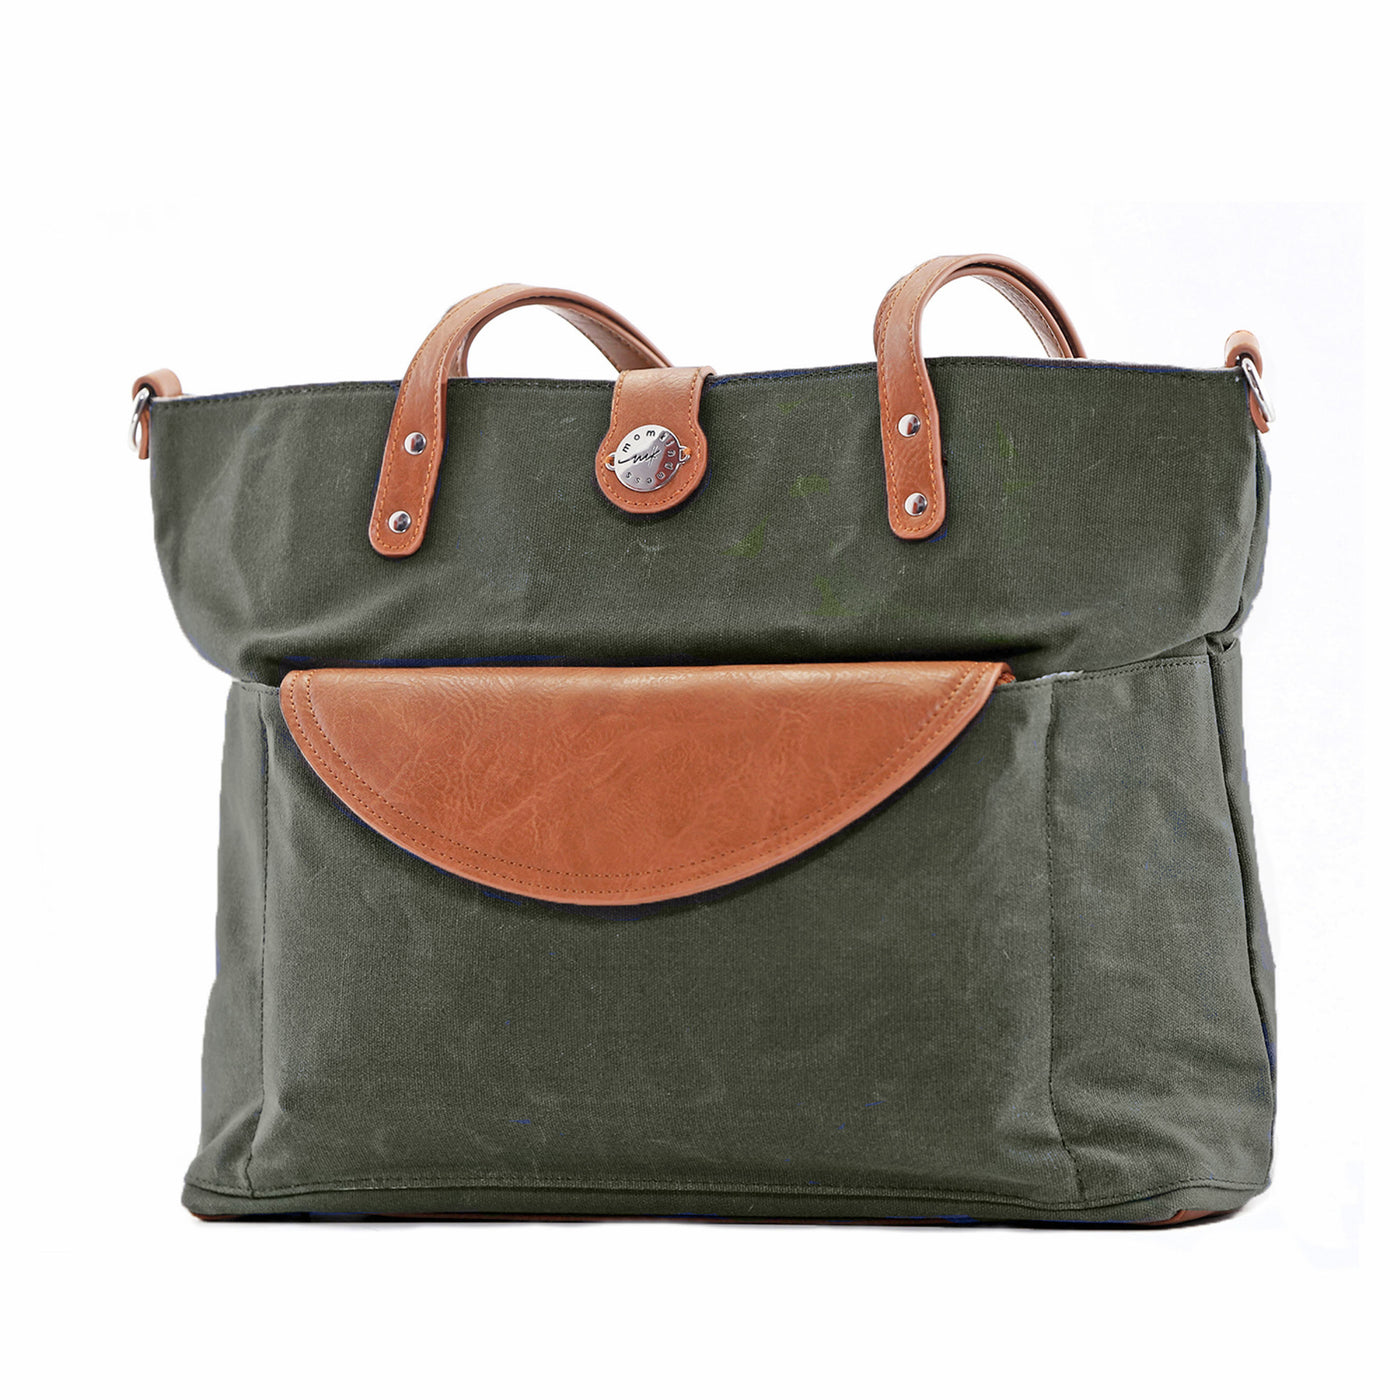 Forest green canvas tote bag with brown vegan leather accents and clutch tucked in front pocket, shown on white background.